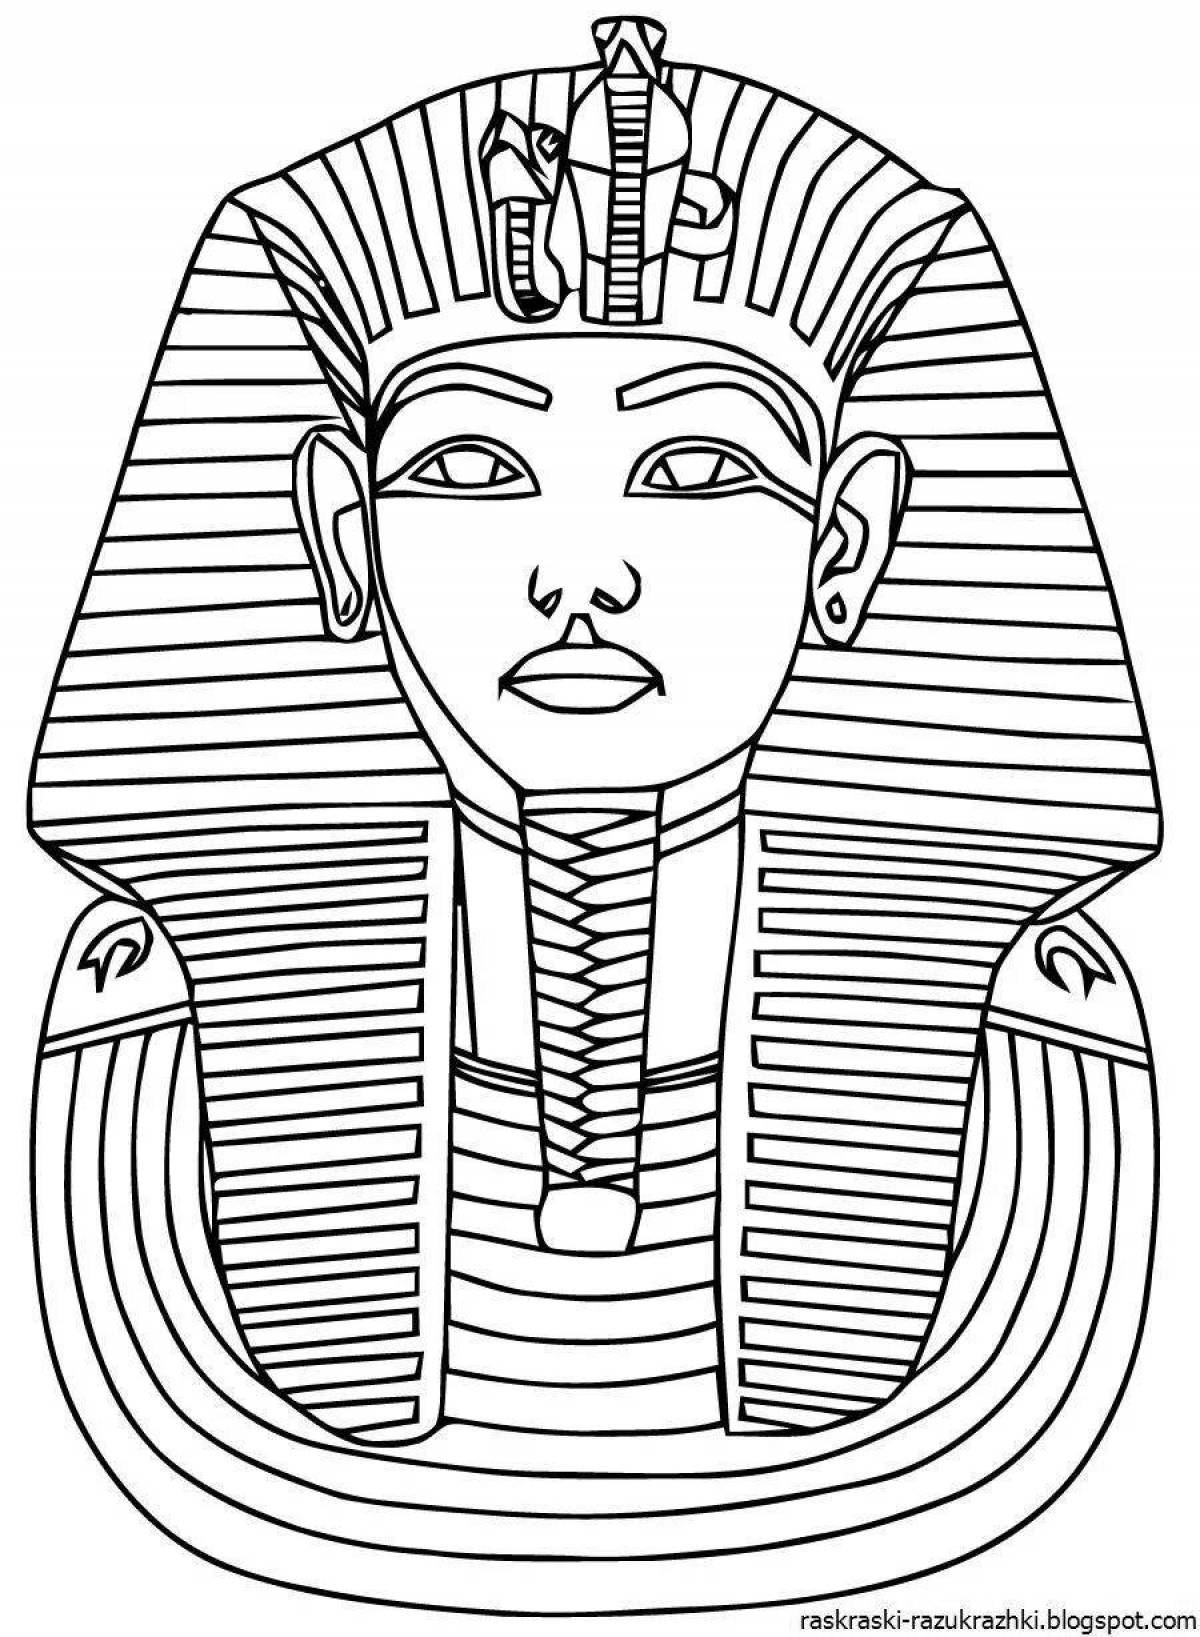 Coloring ancient egypt for children